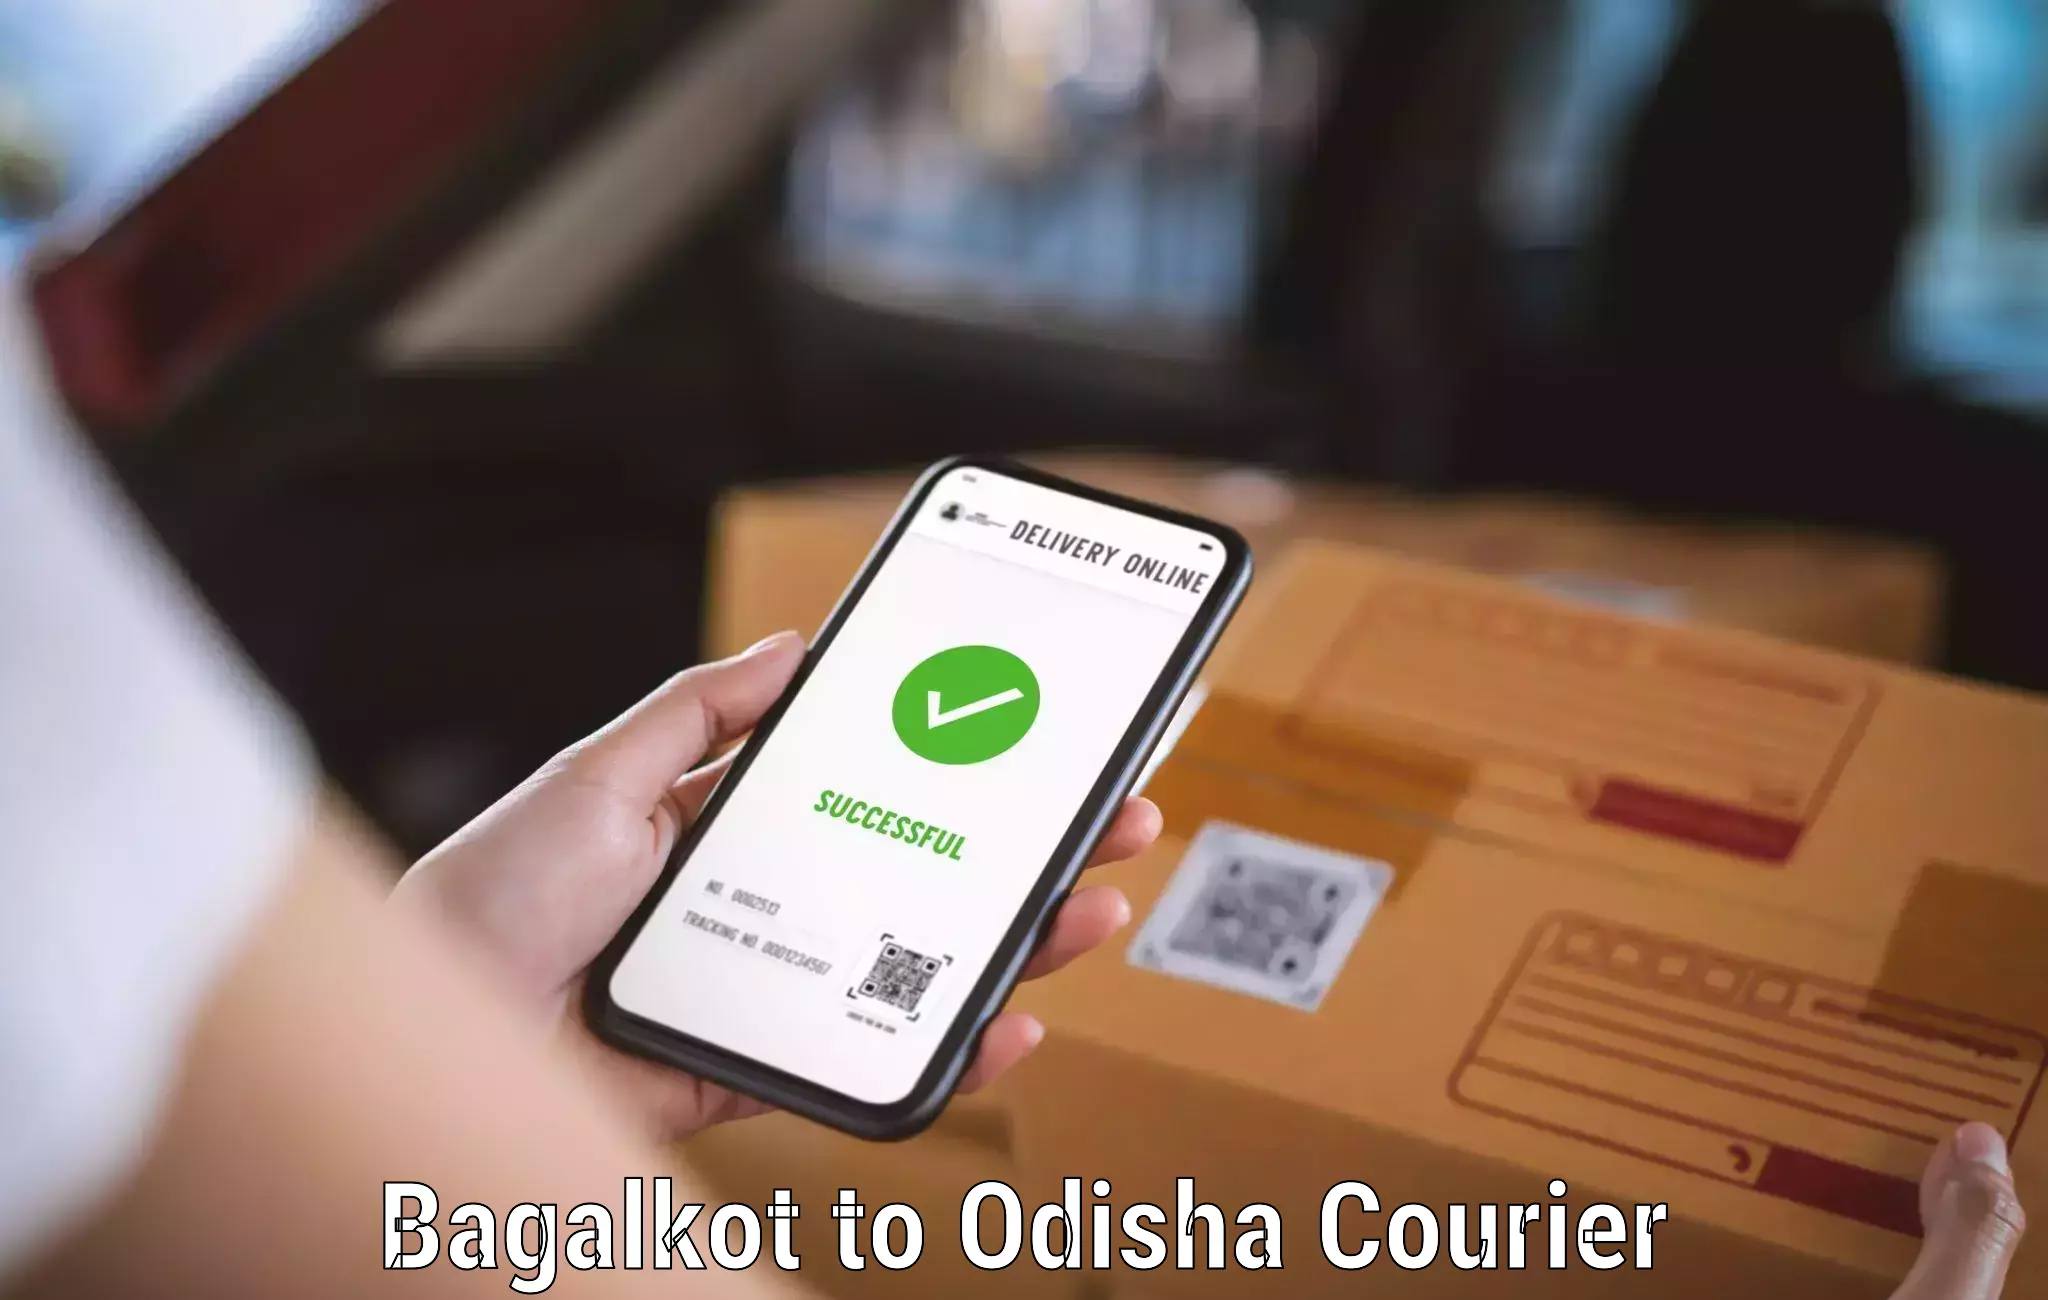 24-hour delivery options Bagalkot to Galleri